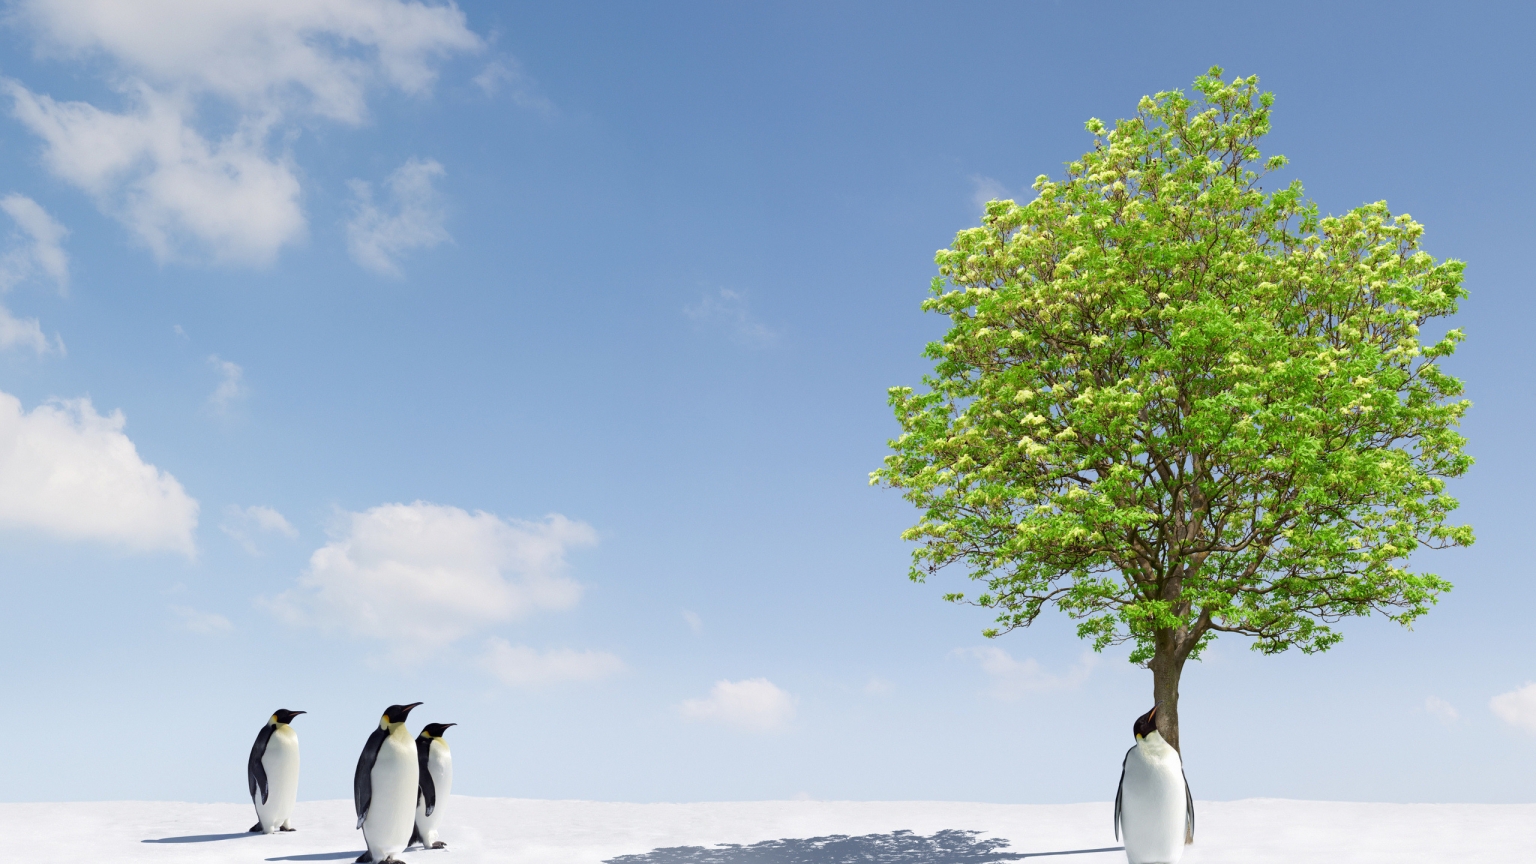 Penguins and Green Tree for 1536 x 864 HDTV resolution